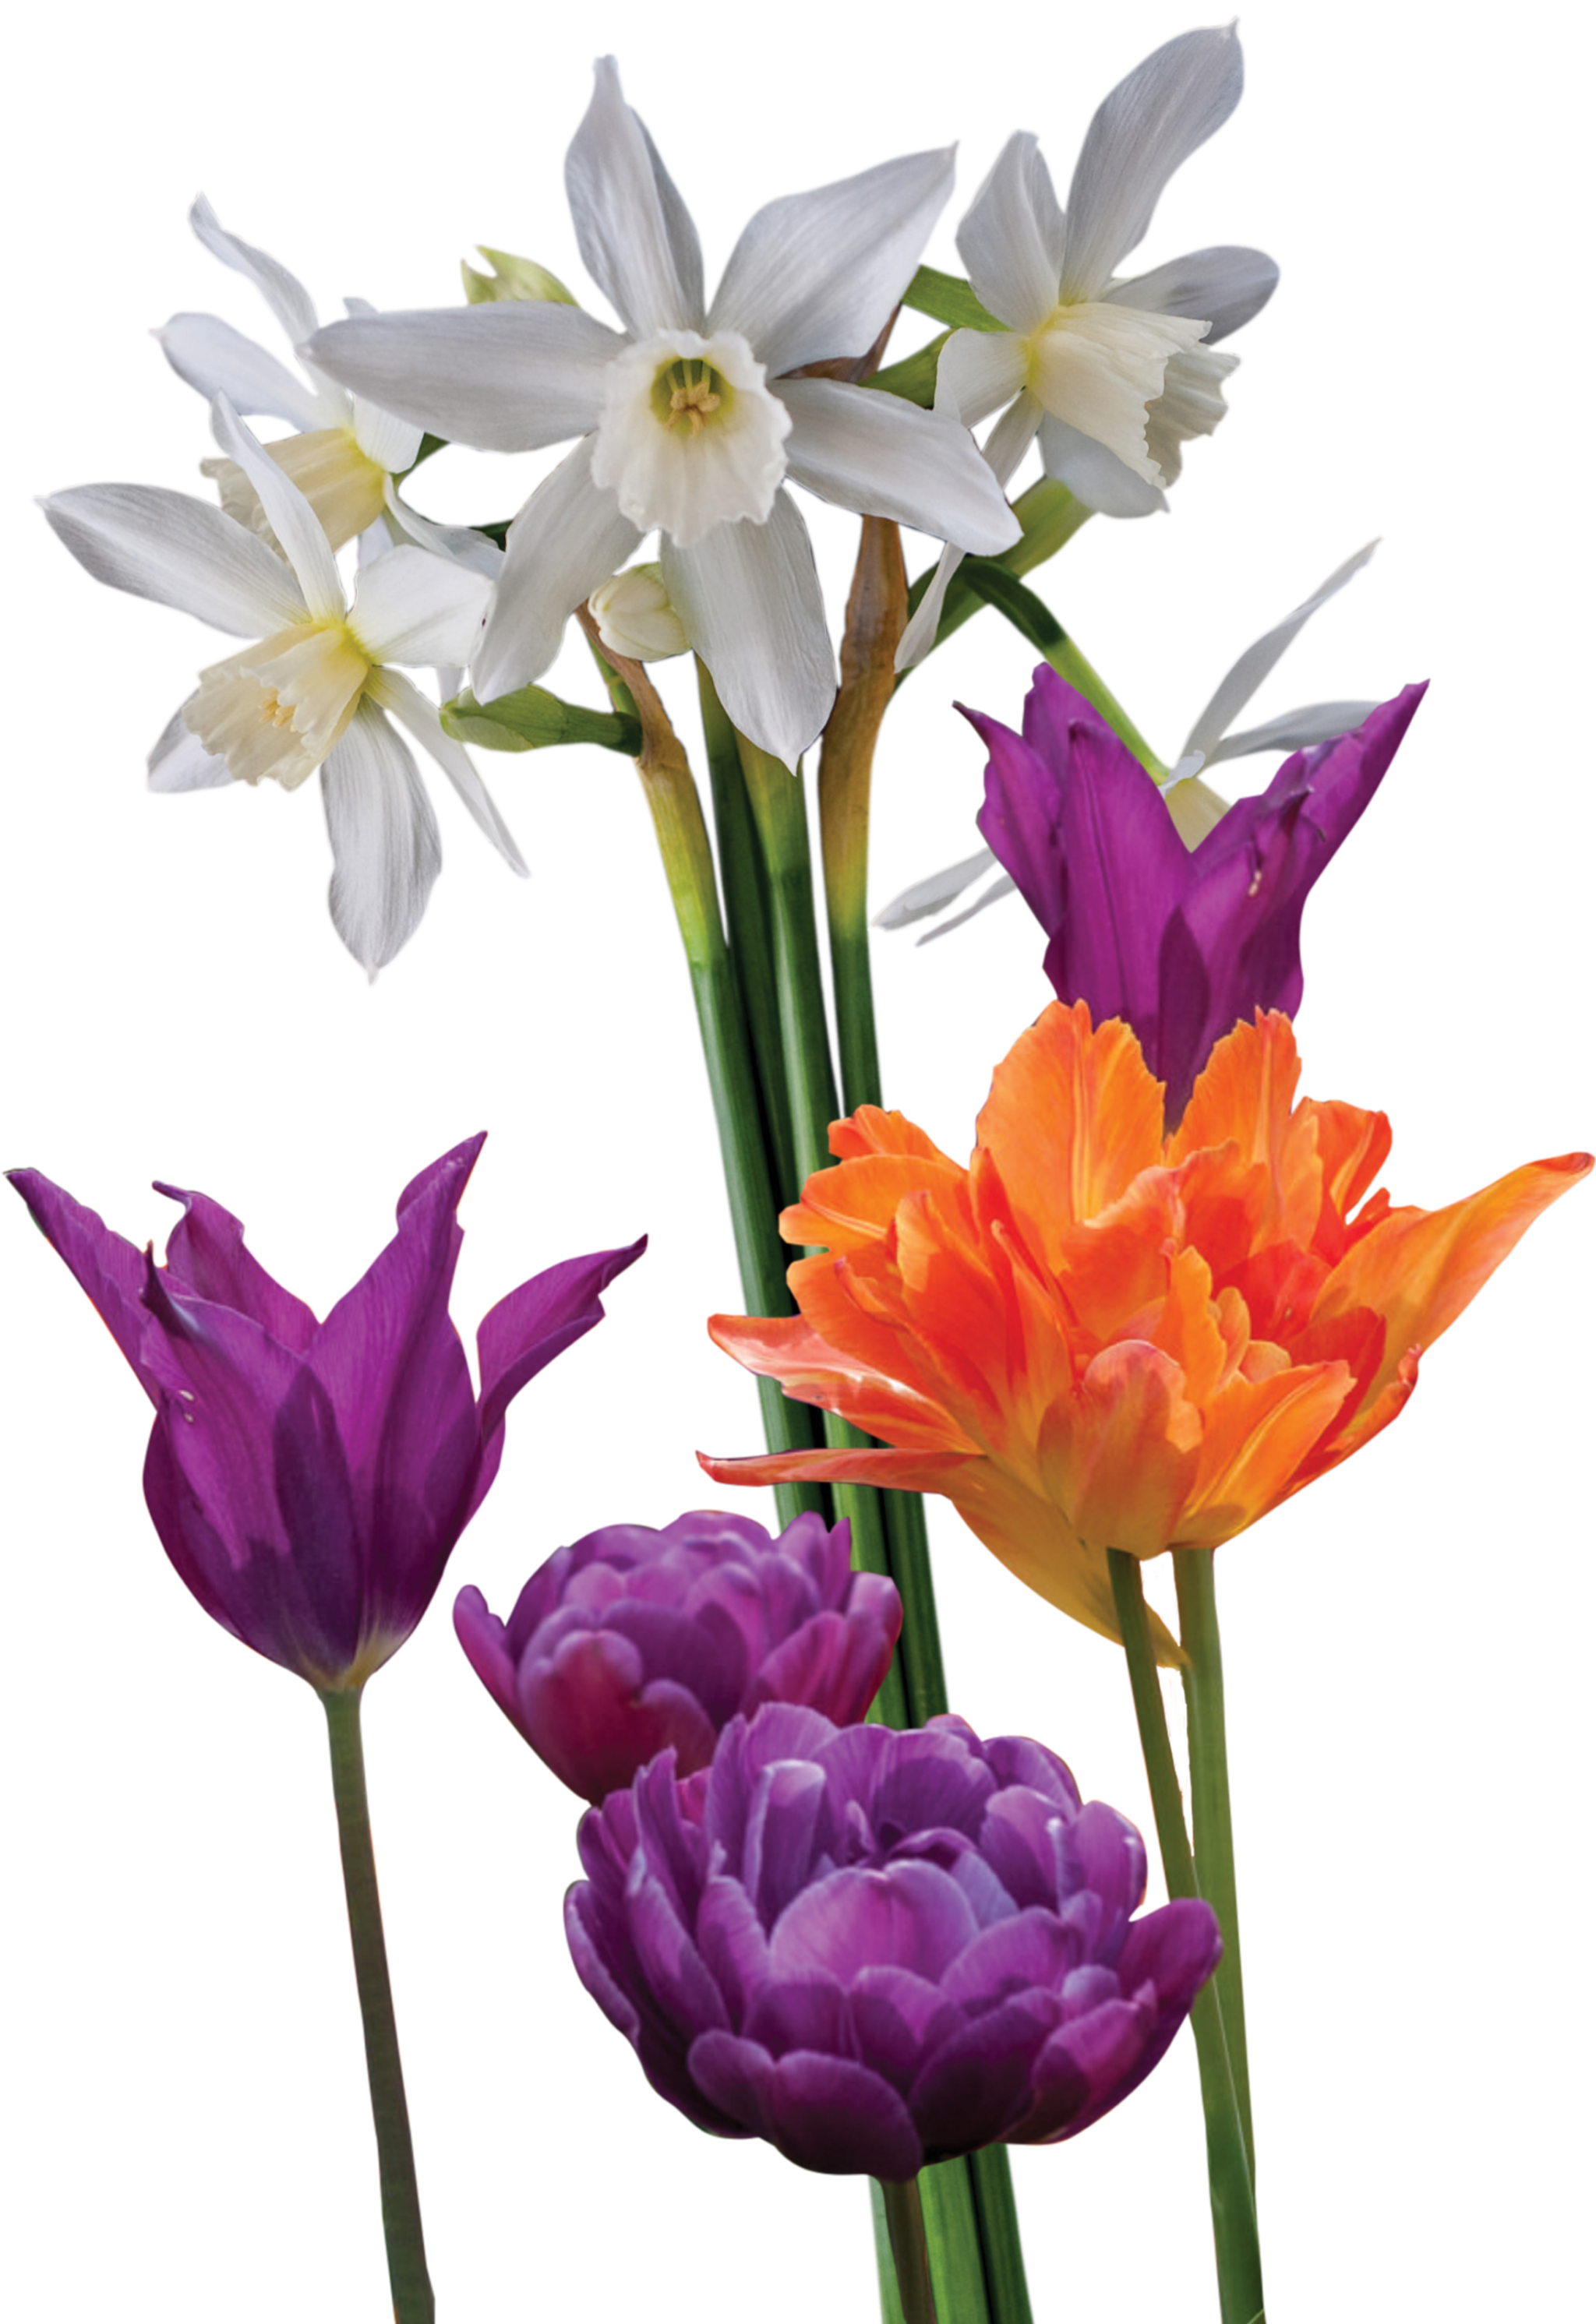 white daffodils and orange and purple tulips in a group